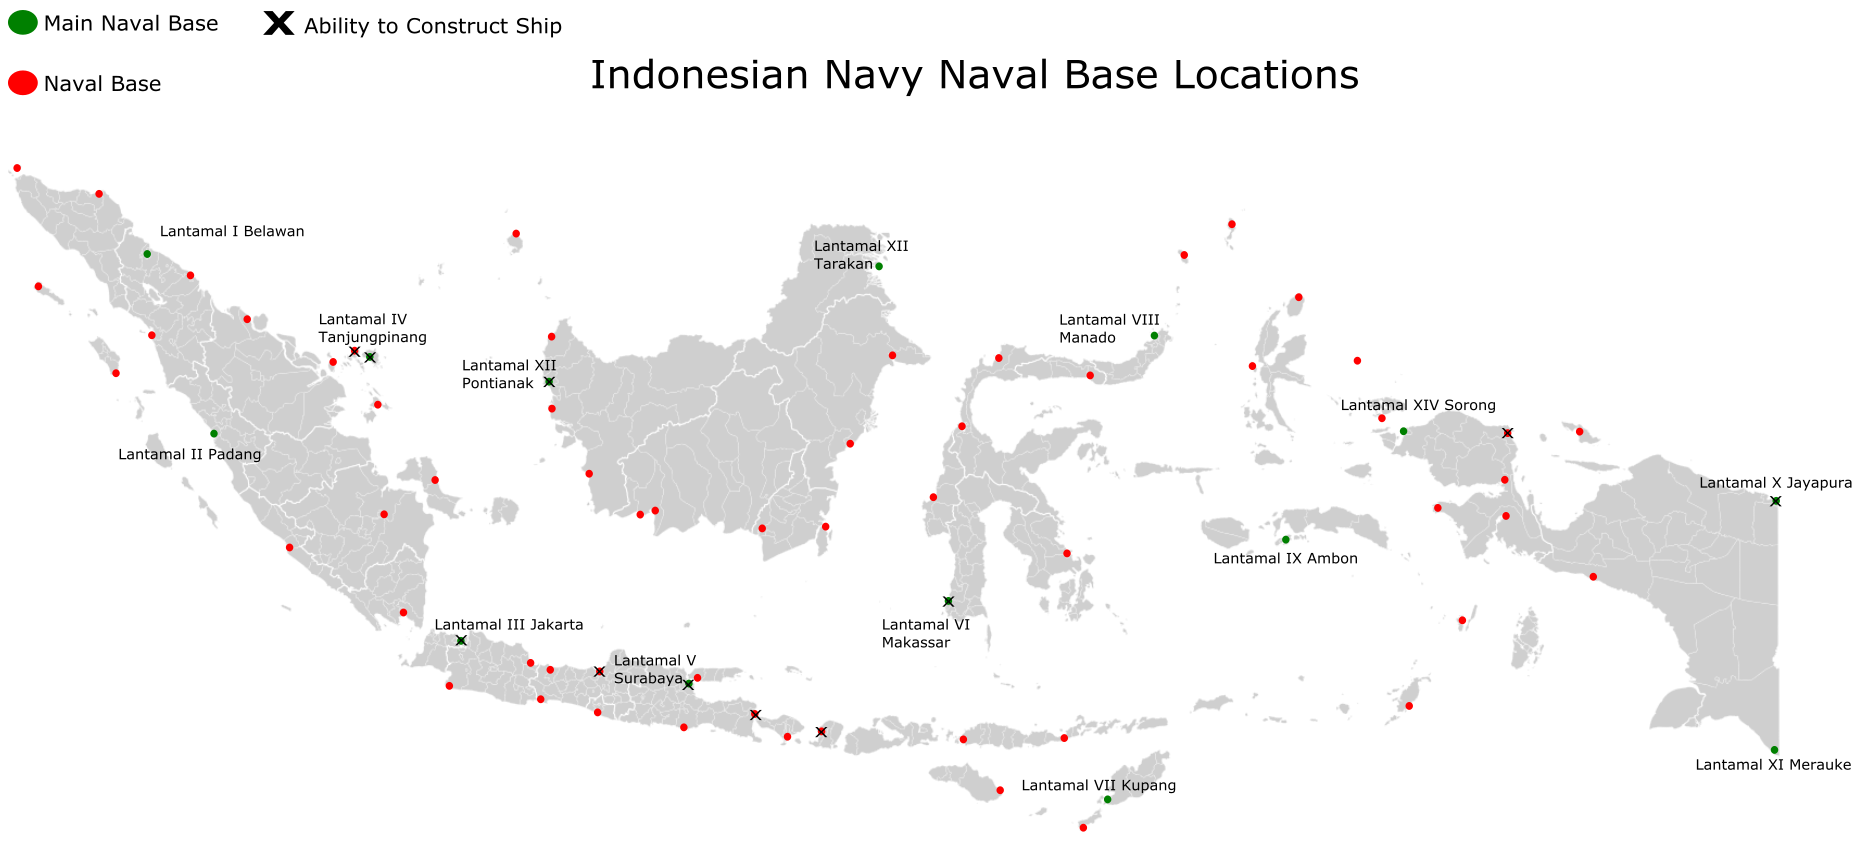 Indonesian Naval Bases and shipyards